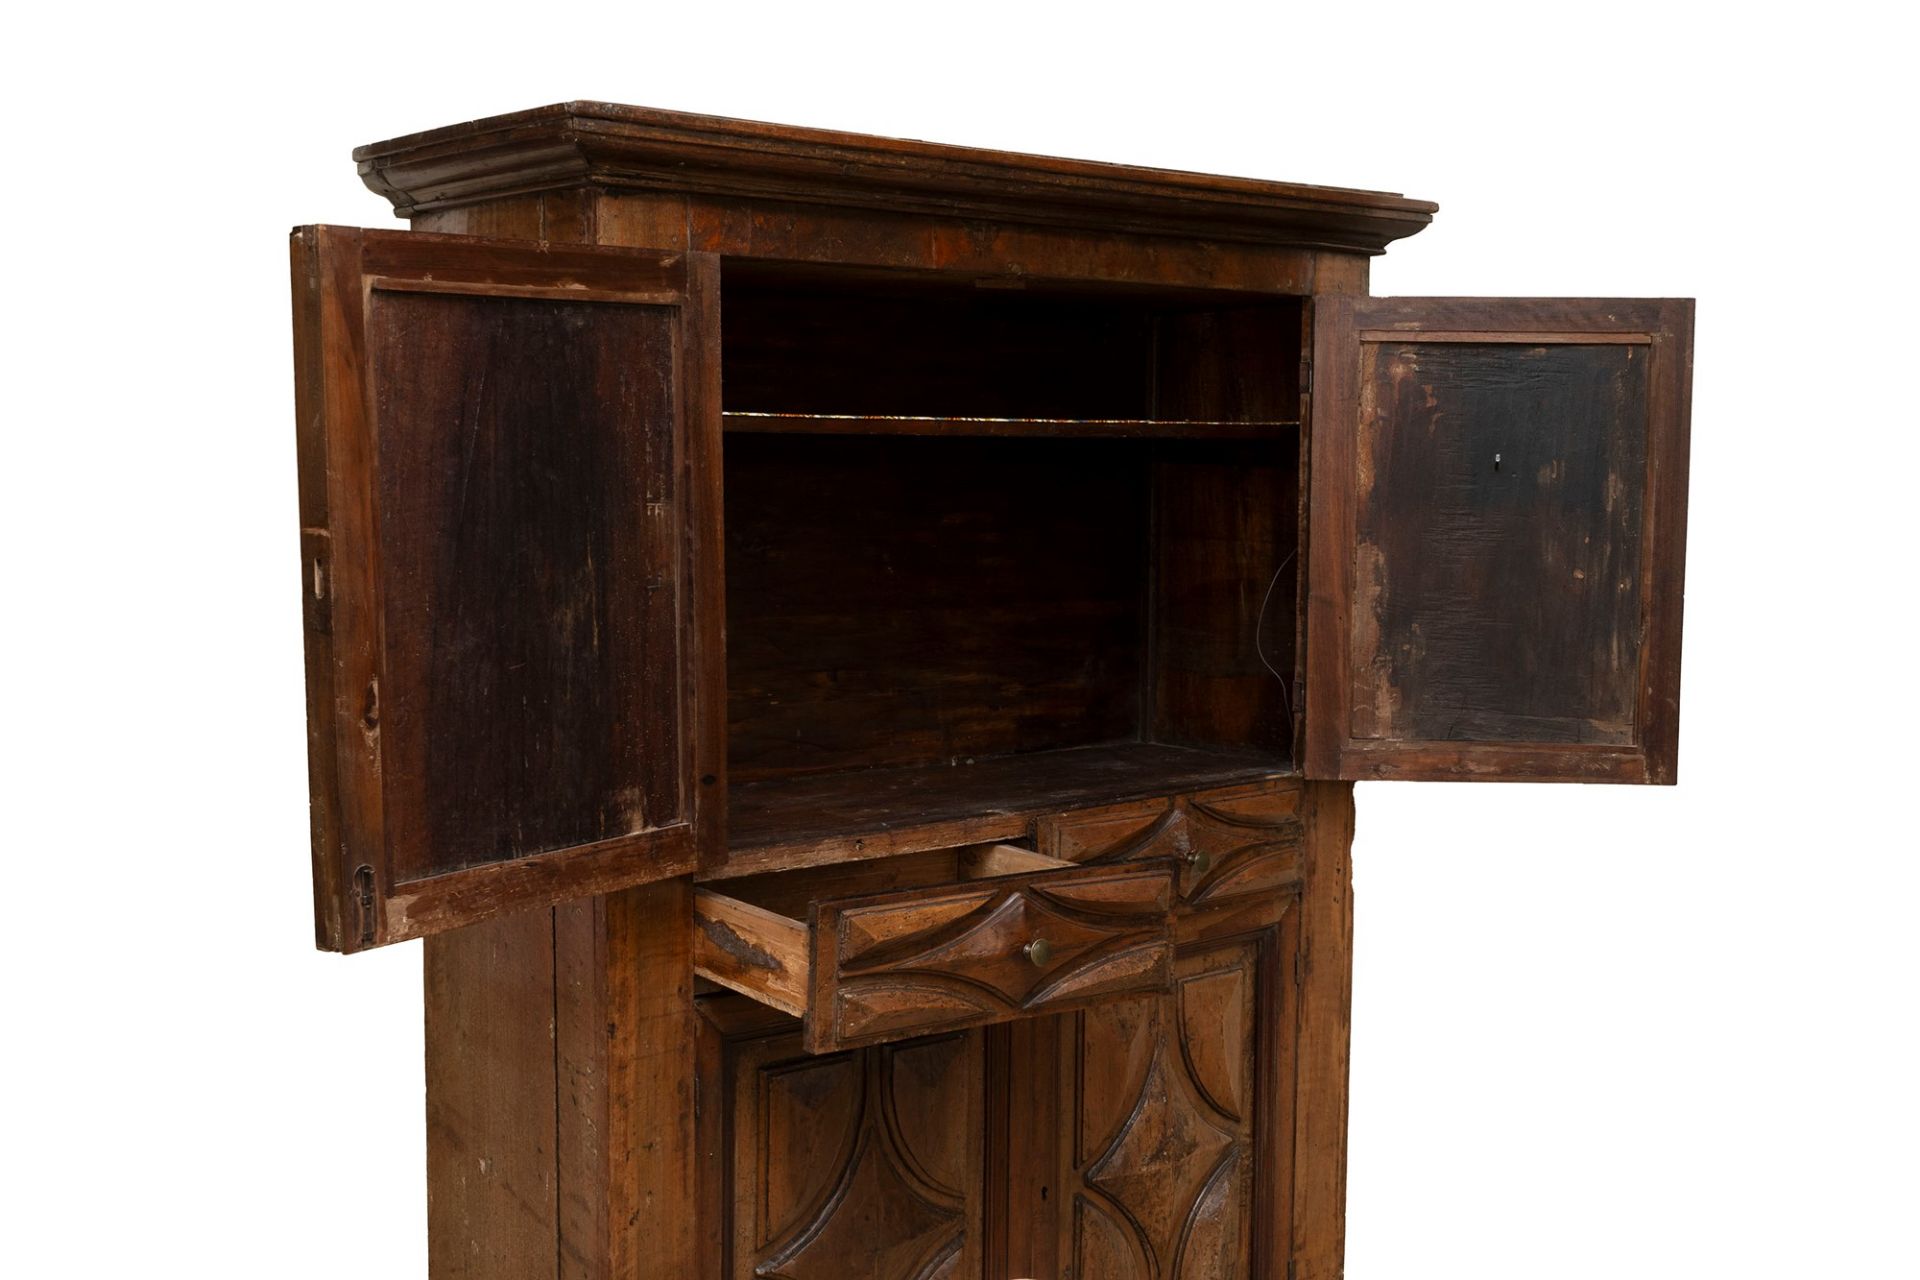 Wooden wardrobe with rhomboidal elements in seventeenth-century style - Image 3 of 3